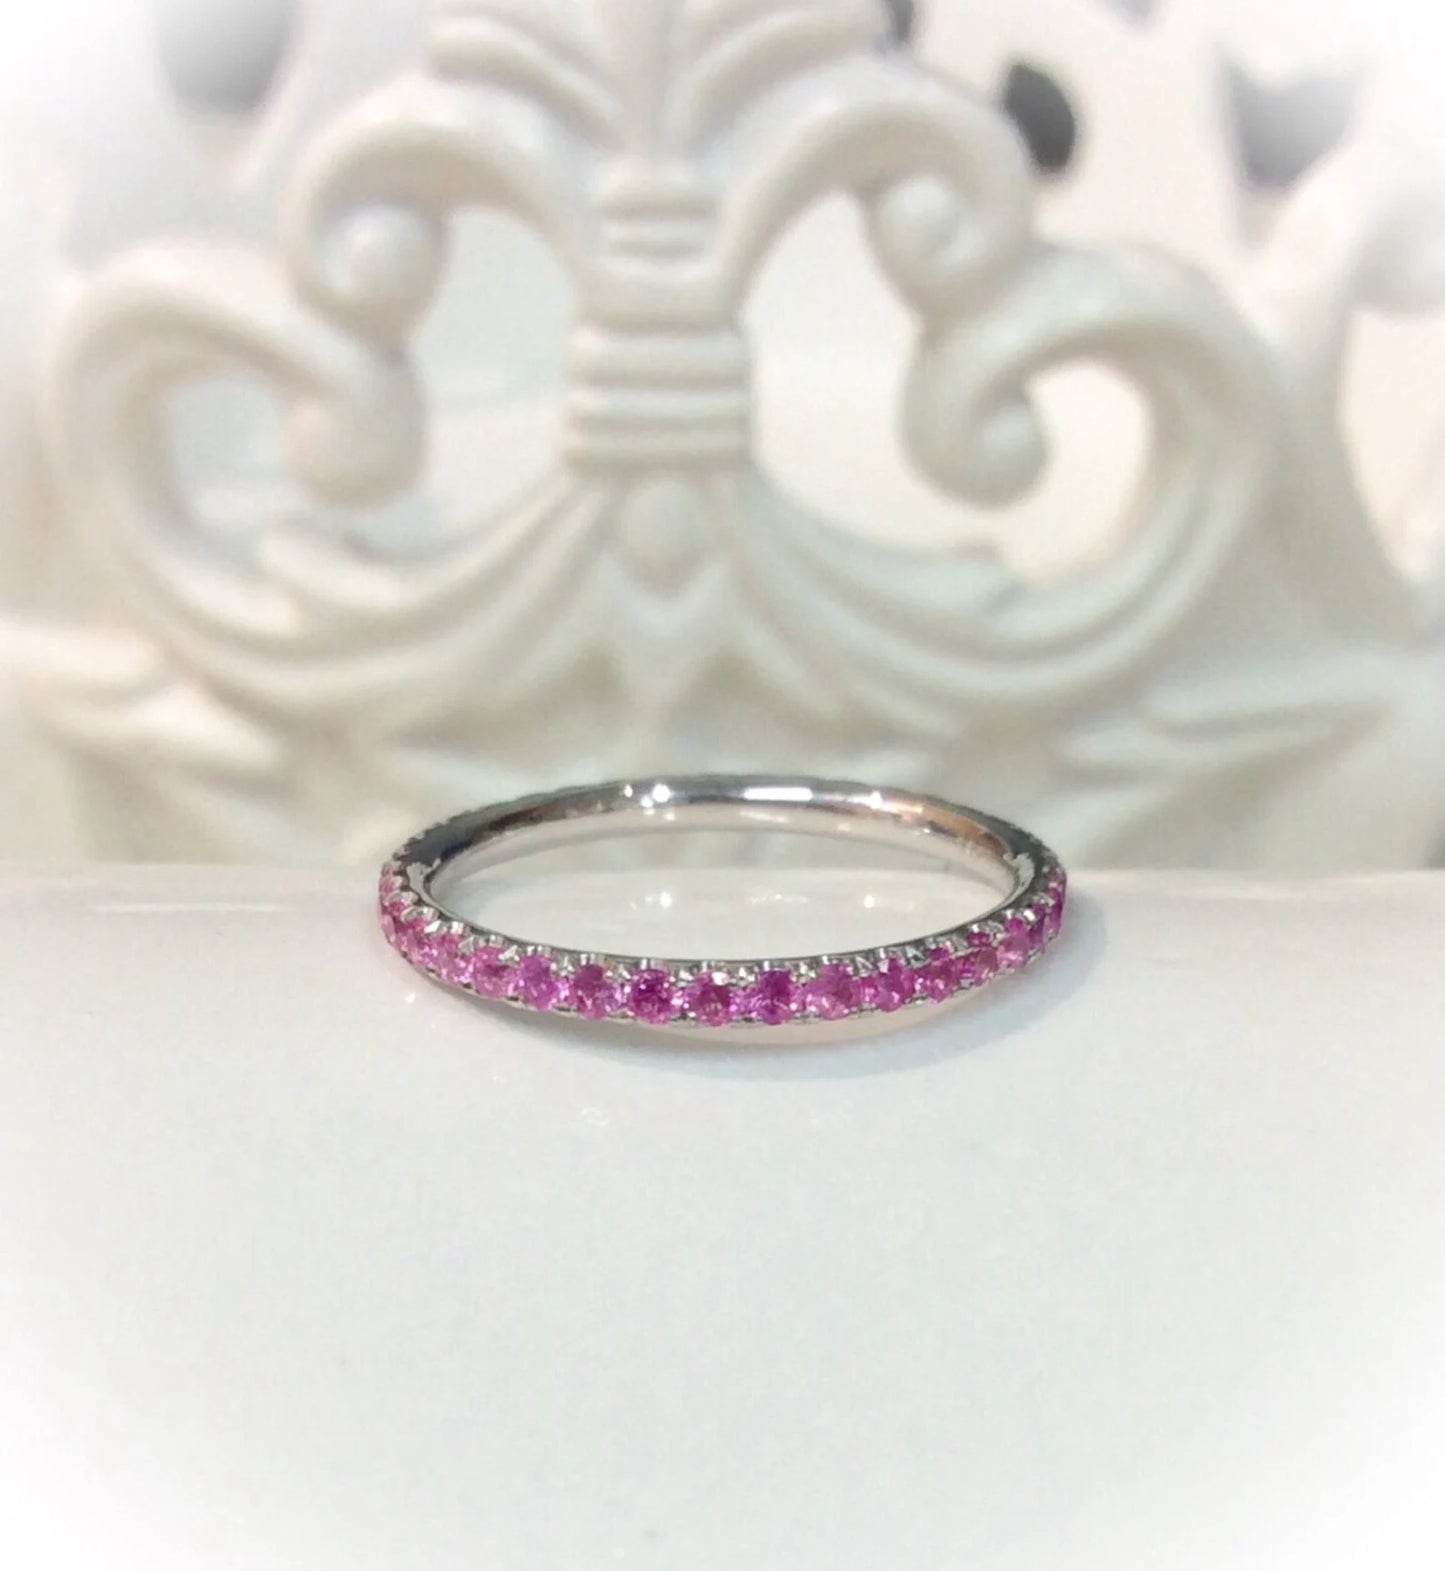 Pink Sapphire Band/ 1.5mm Pave Full Eternity Ring/ Blushing Bride Pink Sapphire Infinity Wedding Band/ September Birthstone Stacking Ring